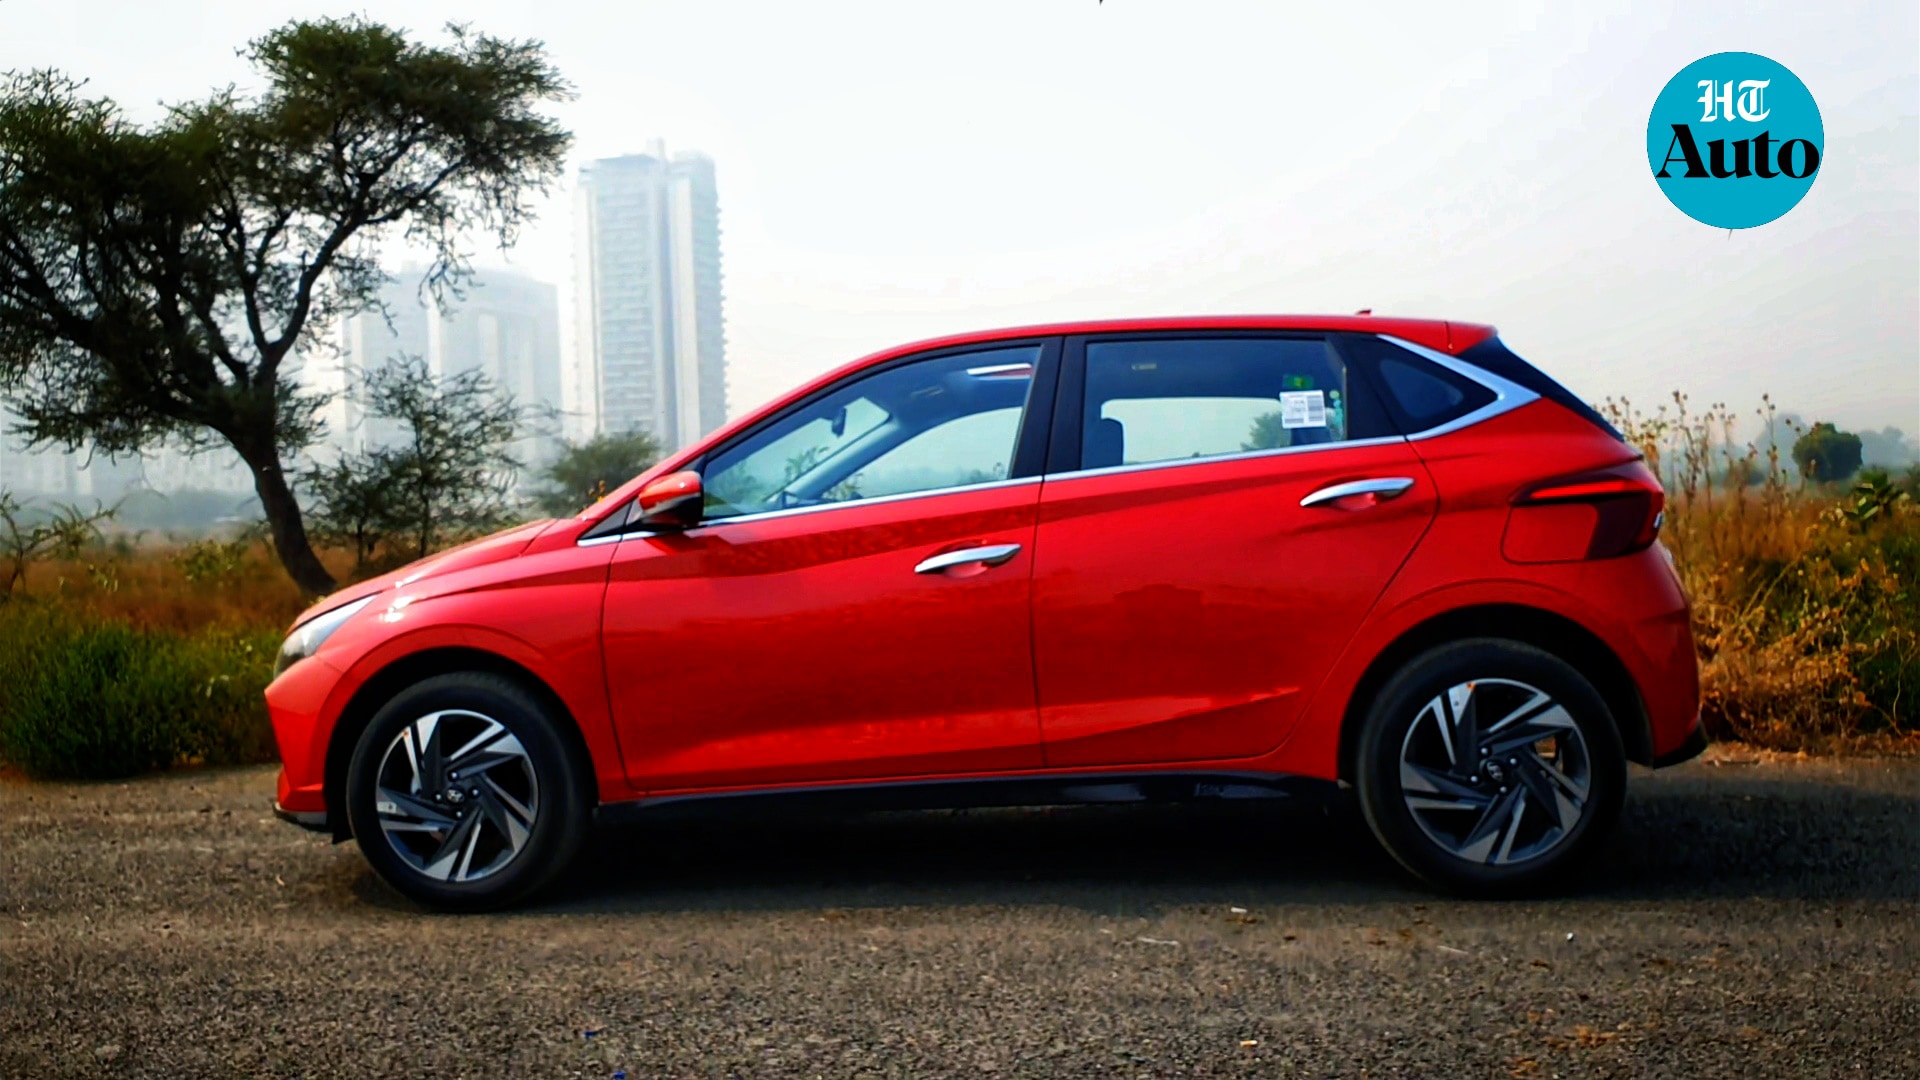 The character lines on the side profile of Hyundai i20 2020 seek to add character to its visual appearance. (HT Photo/Sabyasachi Dasgupta)